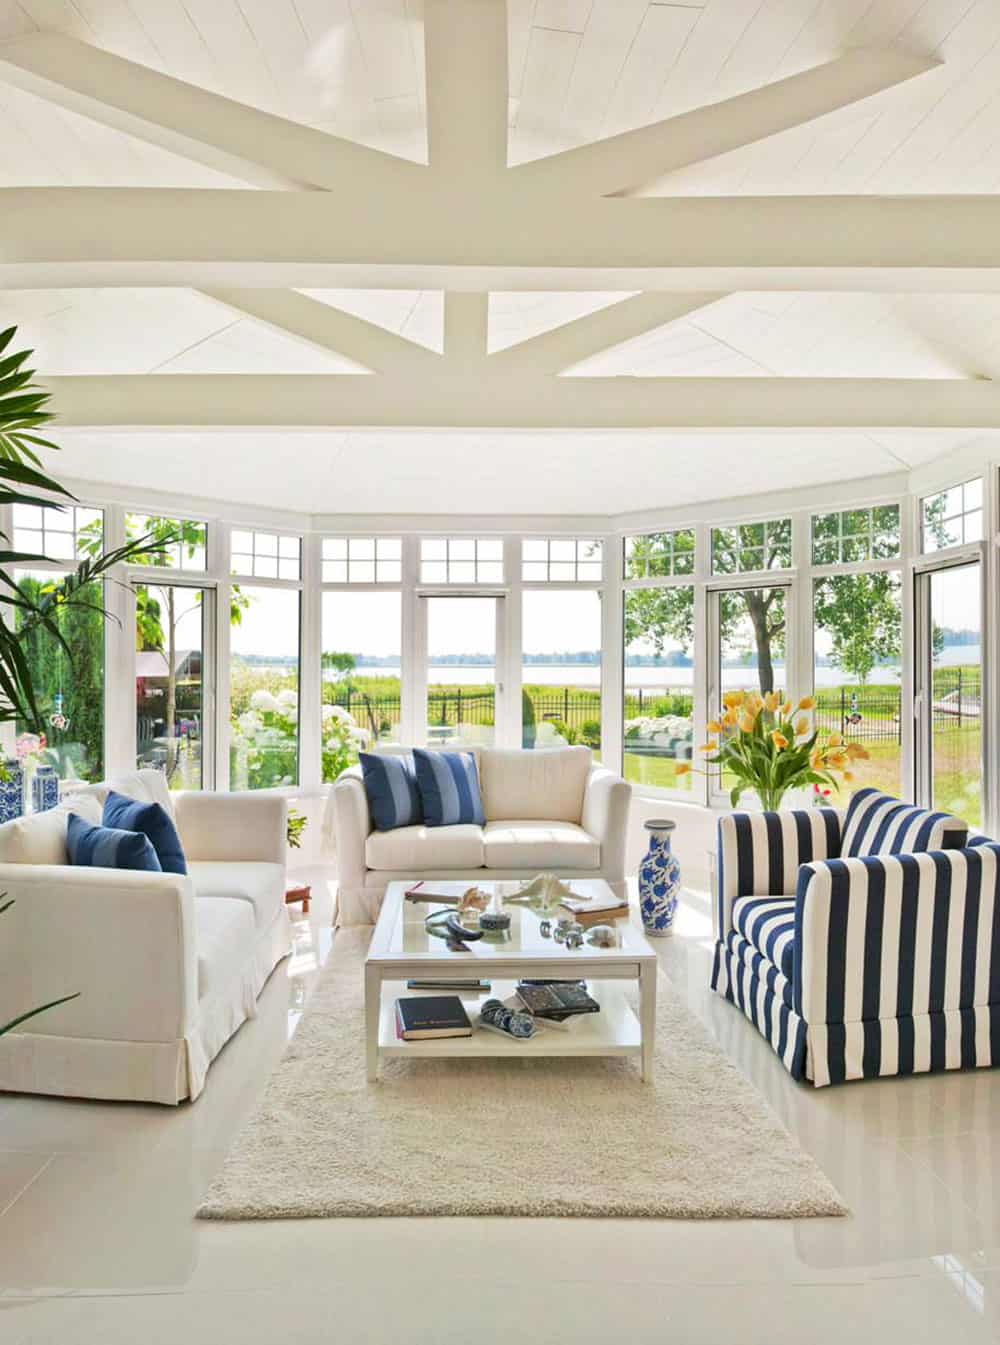 >A few pieces can transform your sunroom into the perfect relaxing and casual space.